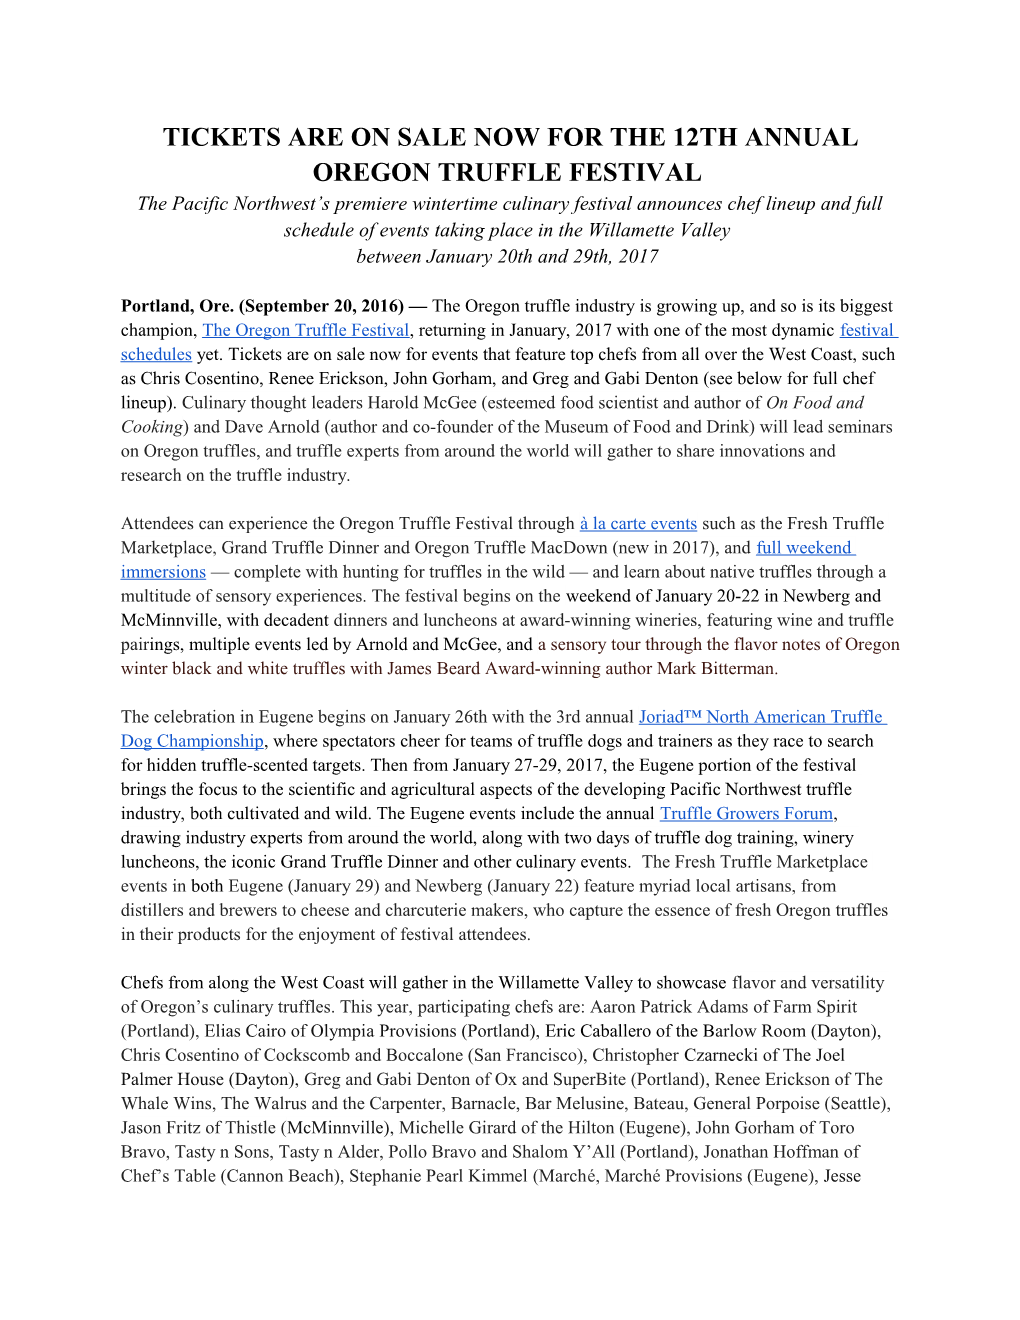 Tickets Are on Sale Now for the 12Th Annual Oregon Truffle Festival